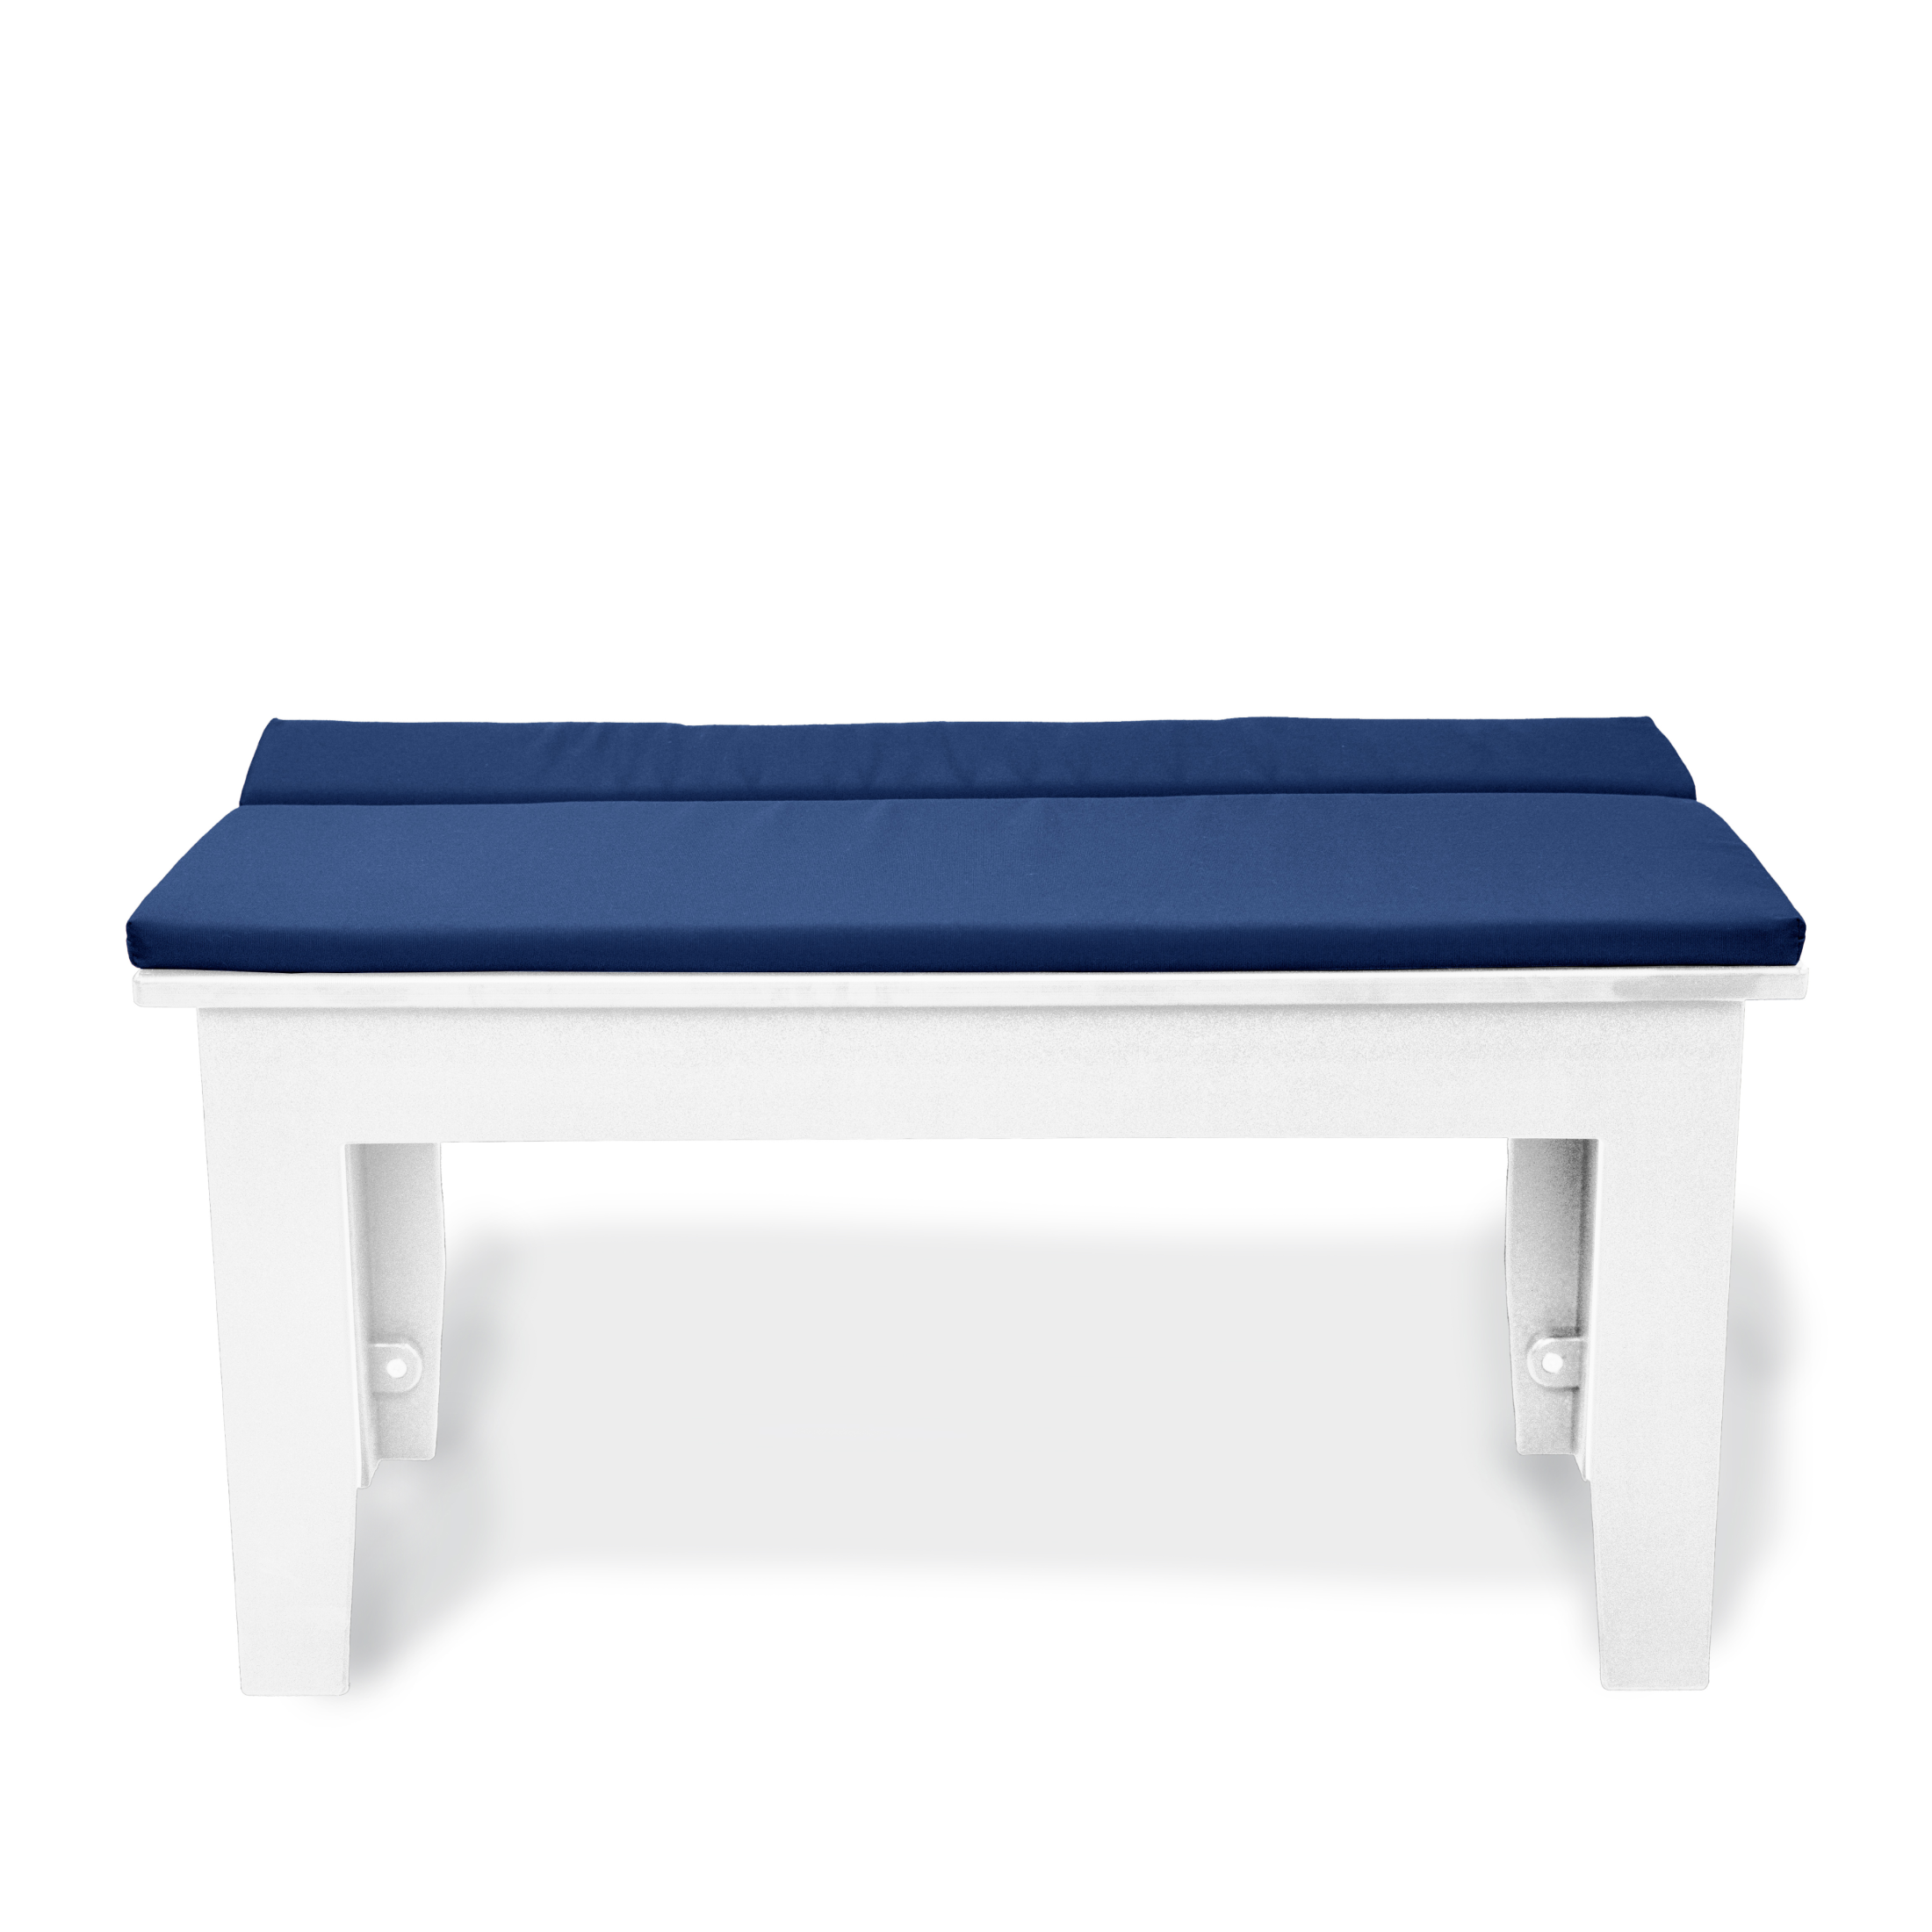 Dining Bench Cushion, 3 Ft